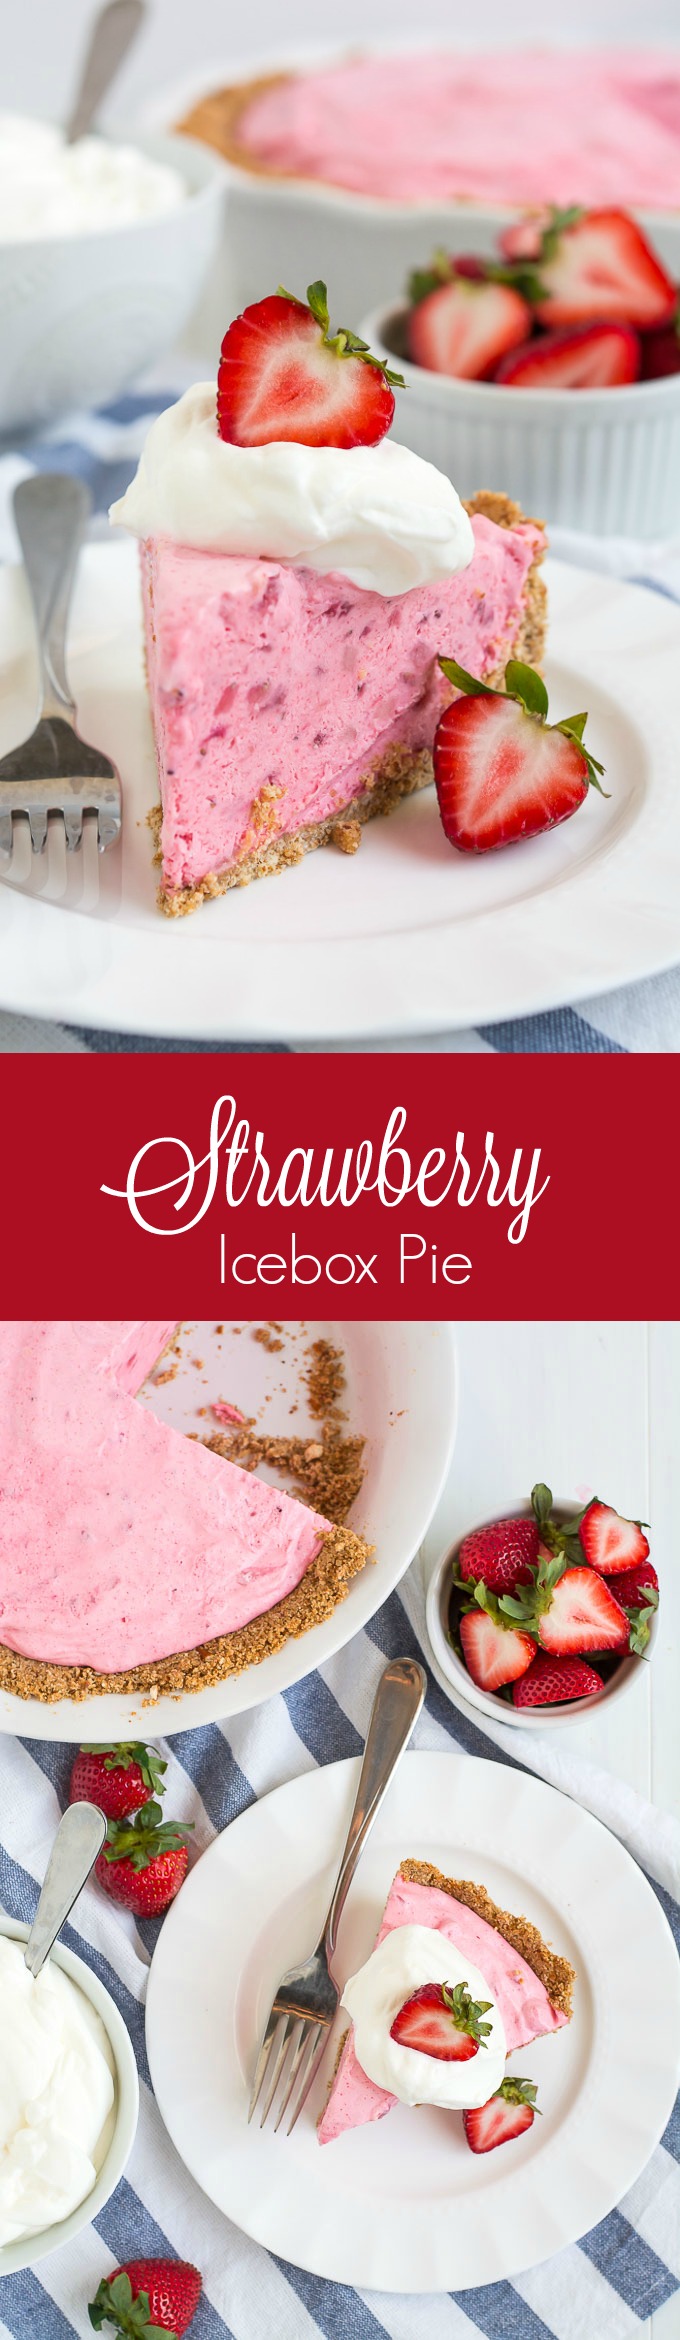 Cool down this summer with a slice of this sweet, simple, and refreshing Strawberry Icebox Pie!